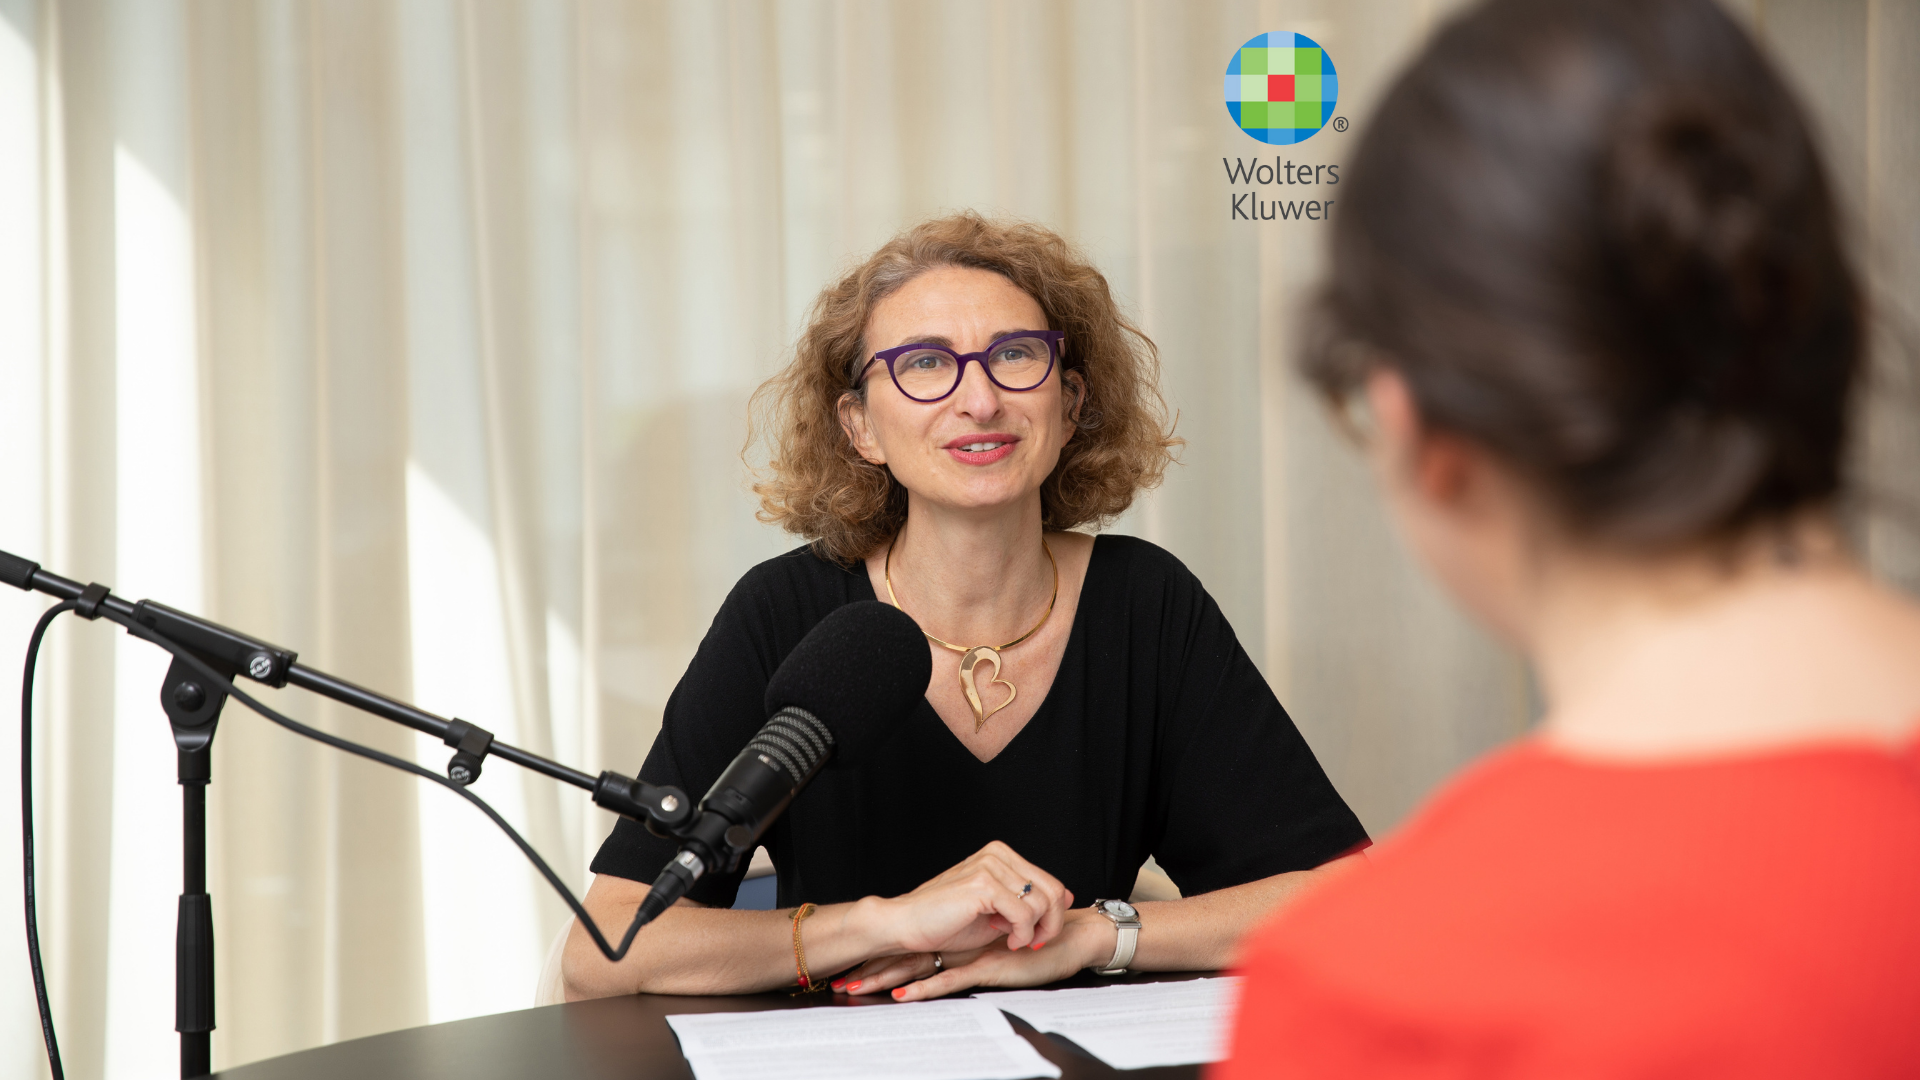 podcast prets delphine bordier wolters kluwer